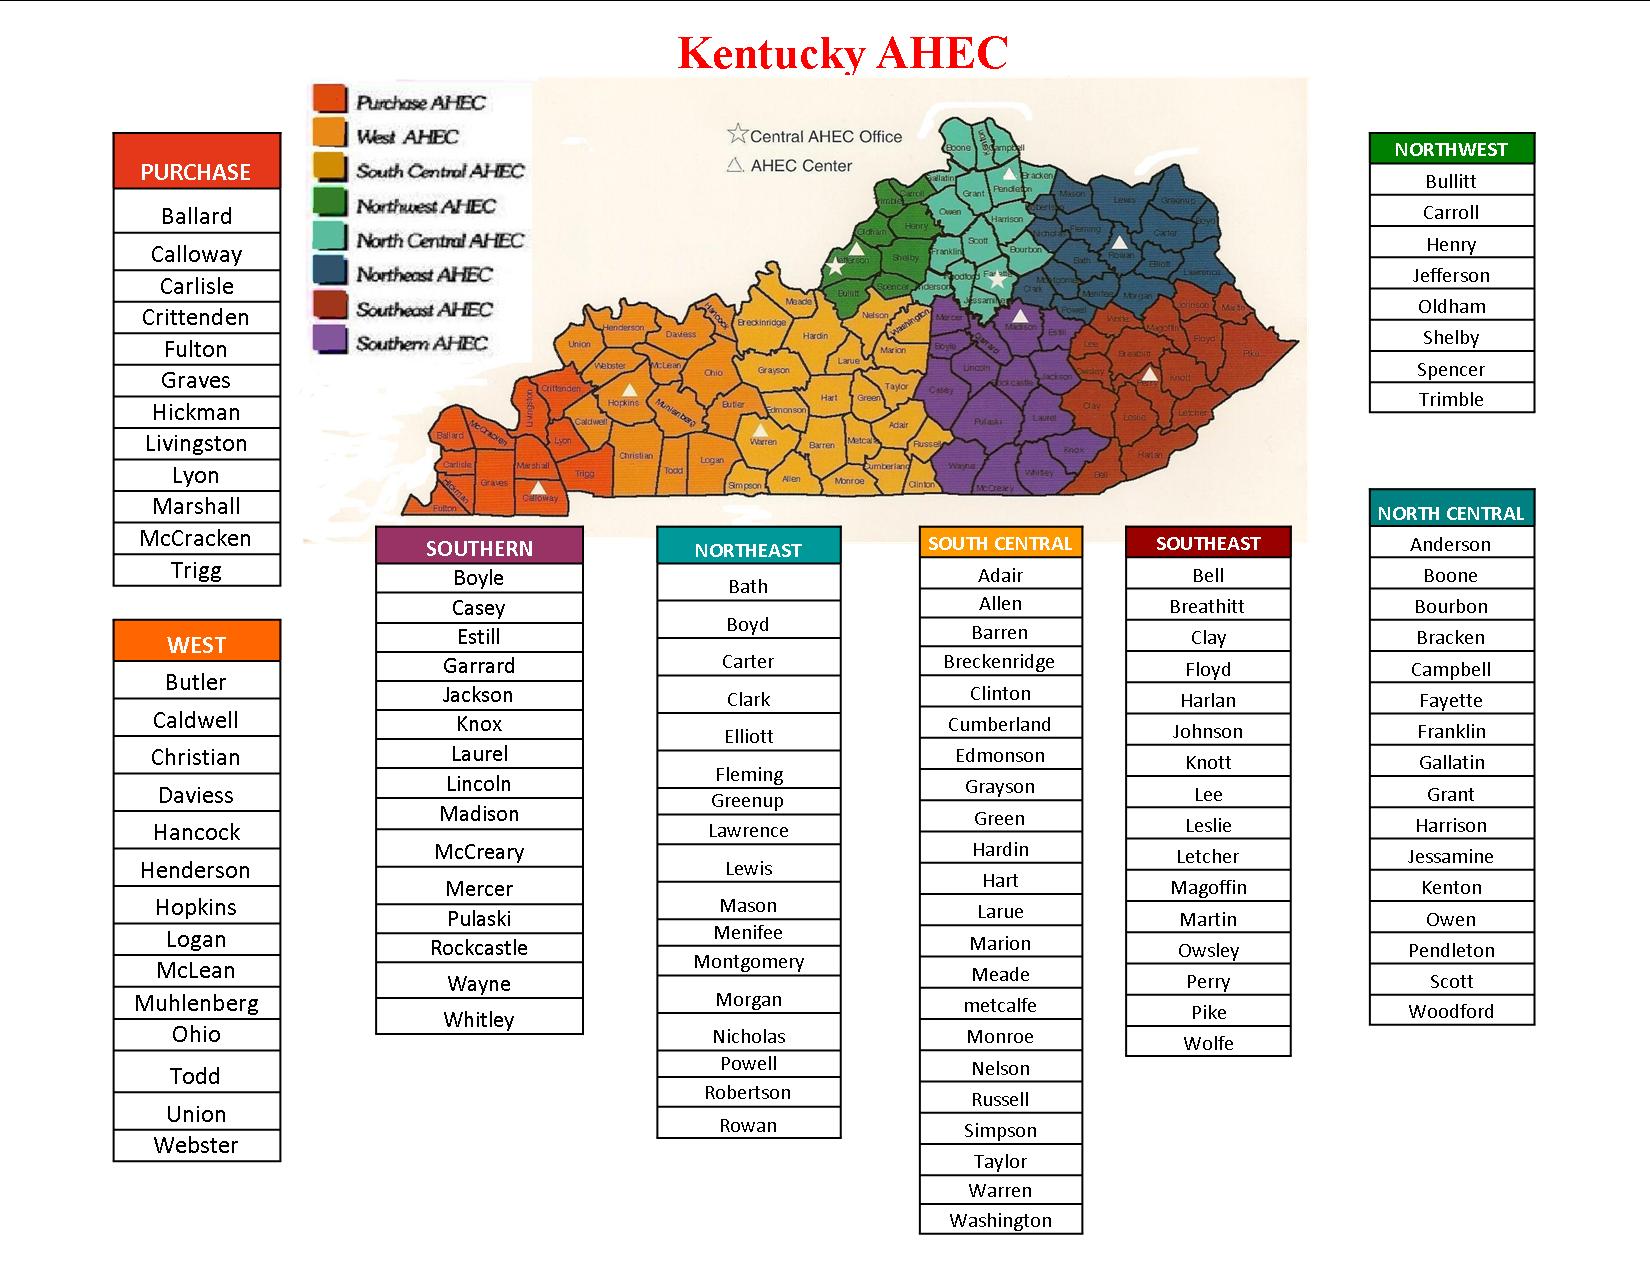 AHEC Counties and Map (2)